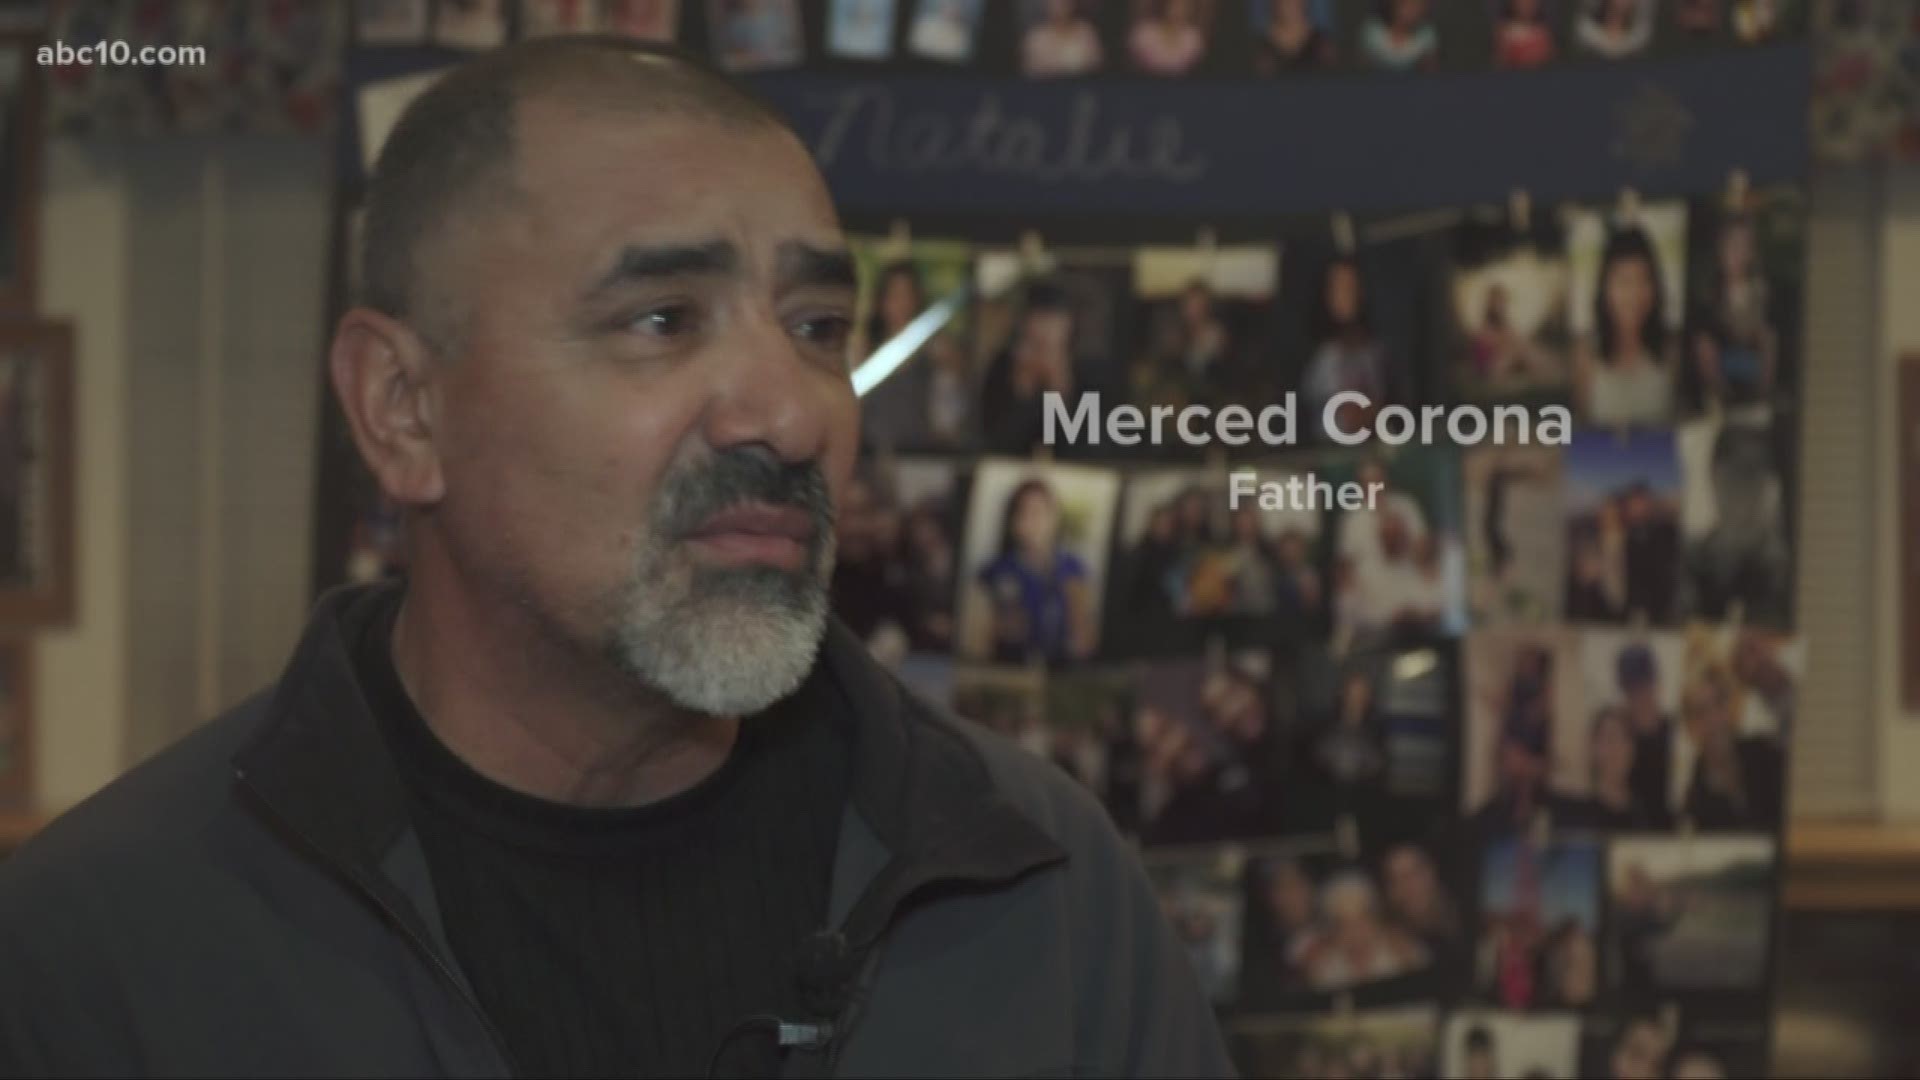 "We're faithful and you have to leave it in the hands of God," Merced Corona said. "You really do. You have to accept that we wanted her here, but God had another plan. You have to accept that. We're gonna grieve. We're gonna grieve for a long time."